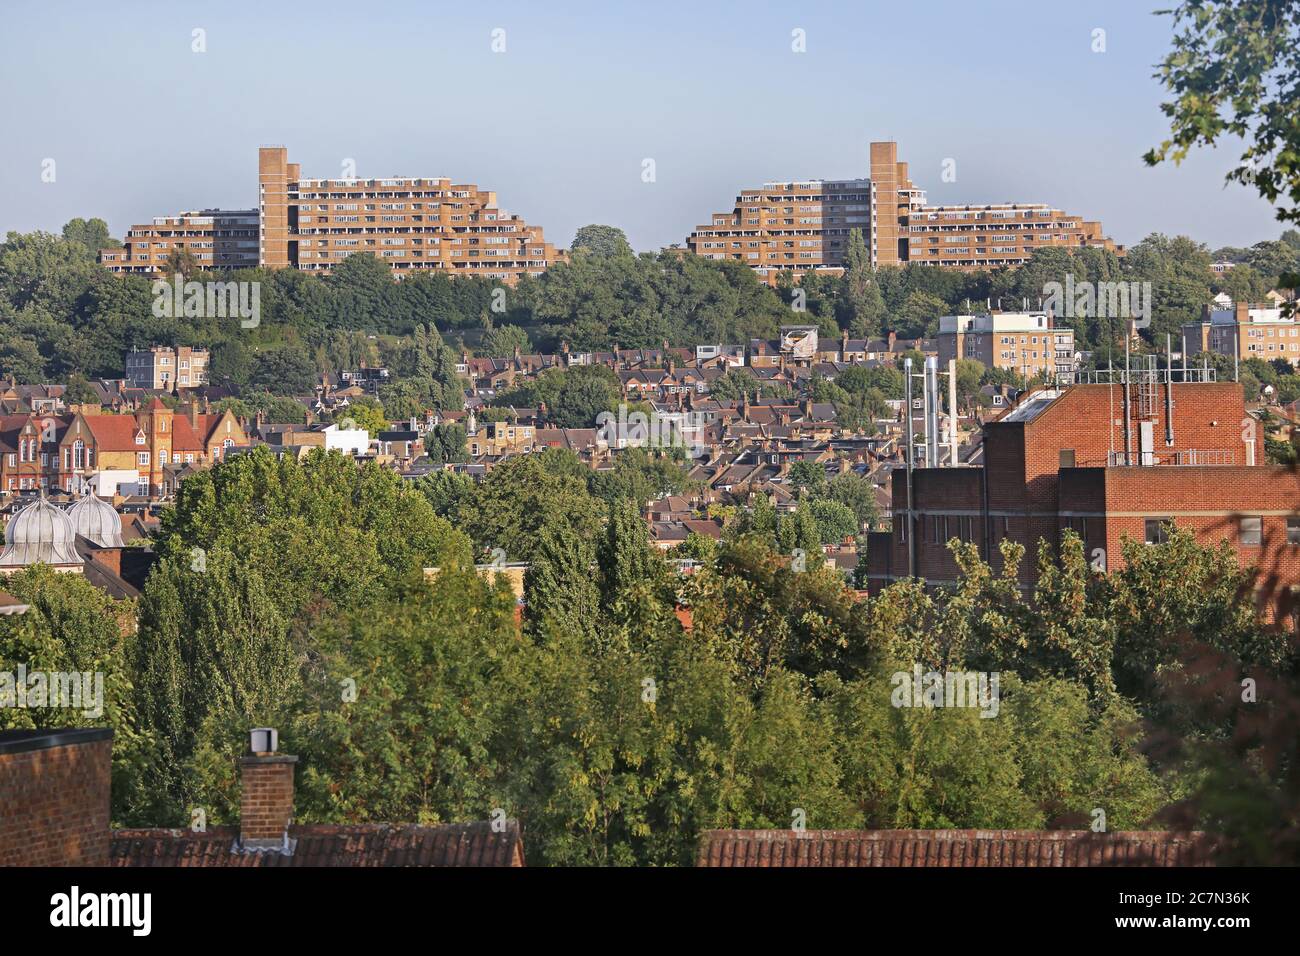 Dawson's Heights, the famous 1960s public housing project in South London, designed by Kate Macintosh. North elevations, viewed from Denmark Hill. Stock Photo